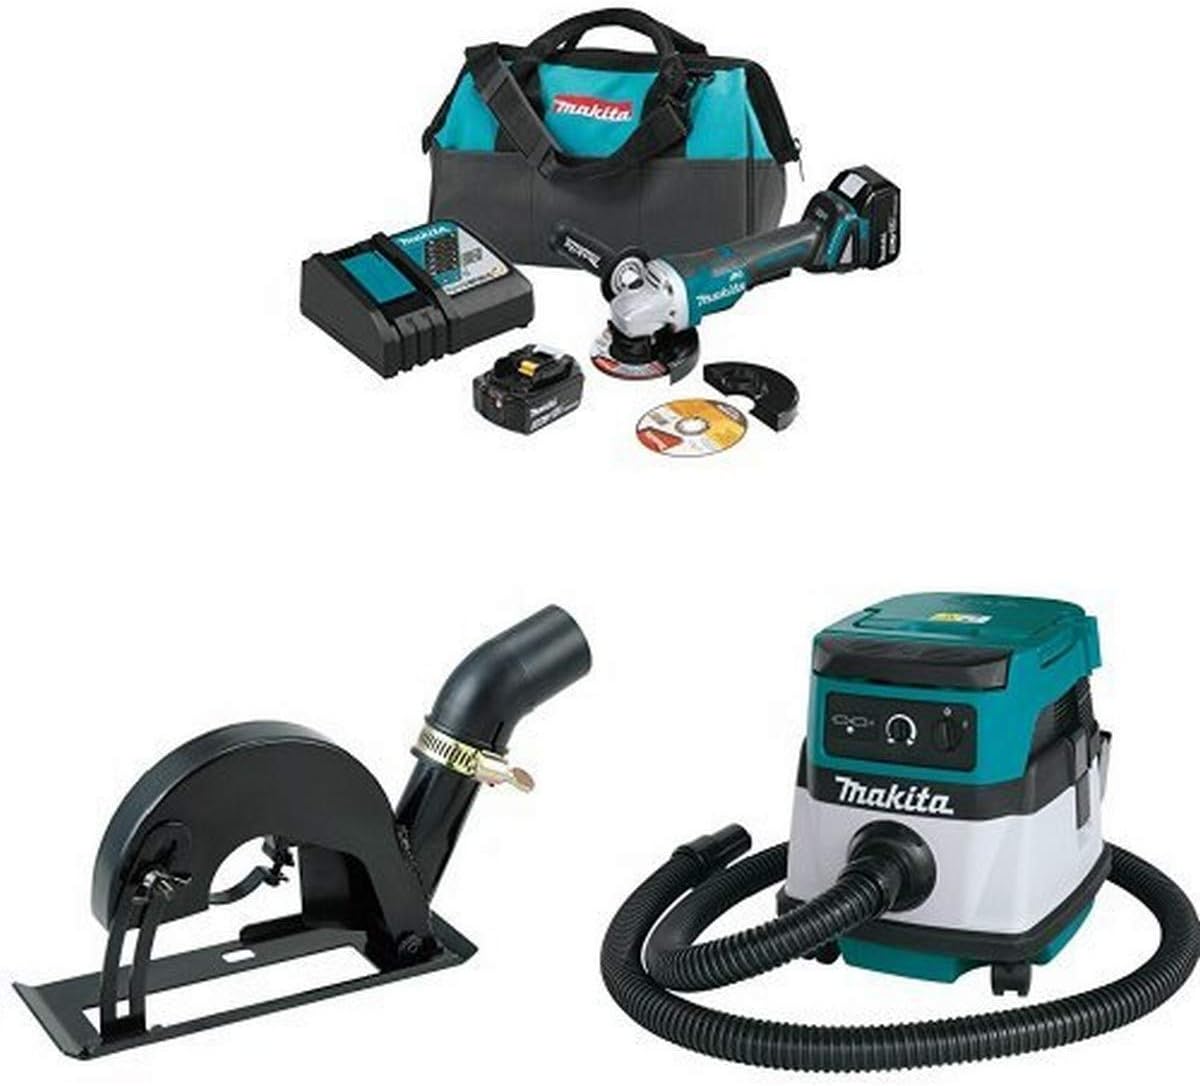 Makita XAG11T 18V LXT Brushless 4-1/2-Inch - 5-Inch Cut-Off/Angle Grinder Kit, 193794-5 Dust Extraction Cutting Guard,  XCV04Z 18V X2 LXT (36V) 2.1 Gallon HEPA Filter Dry Dust Extractor/Vacuum